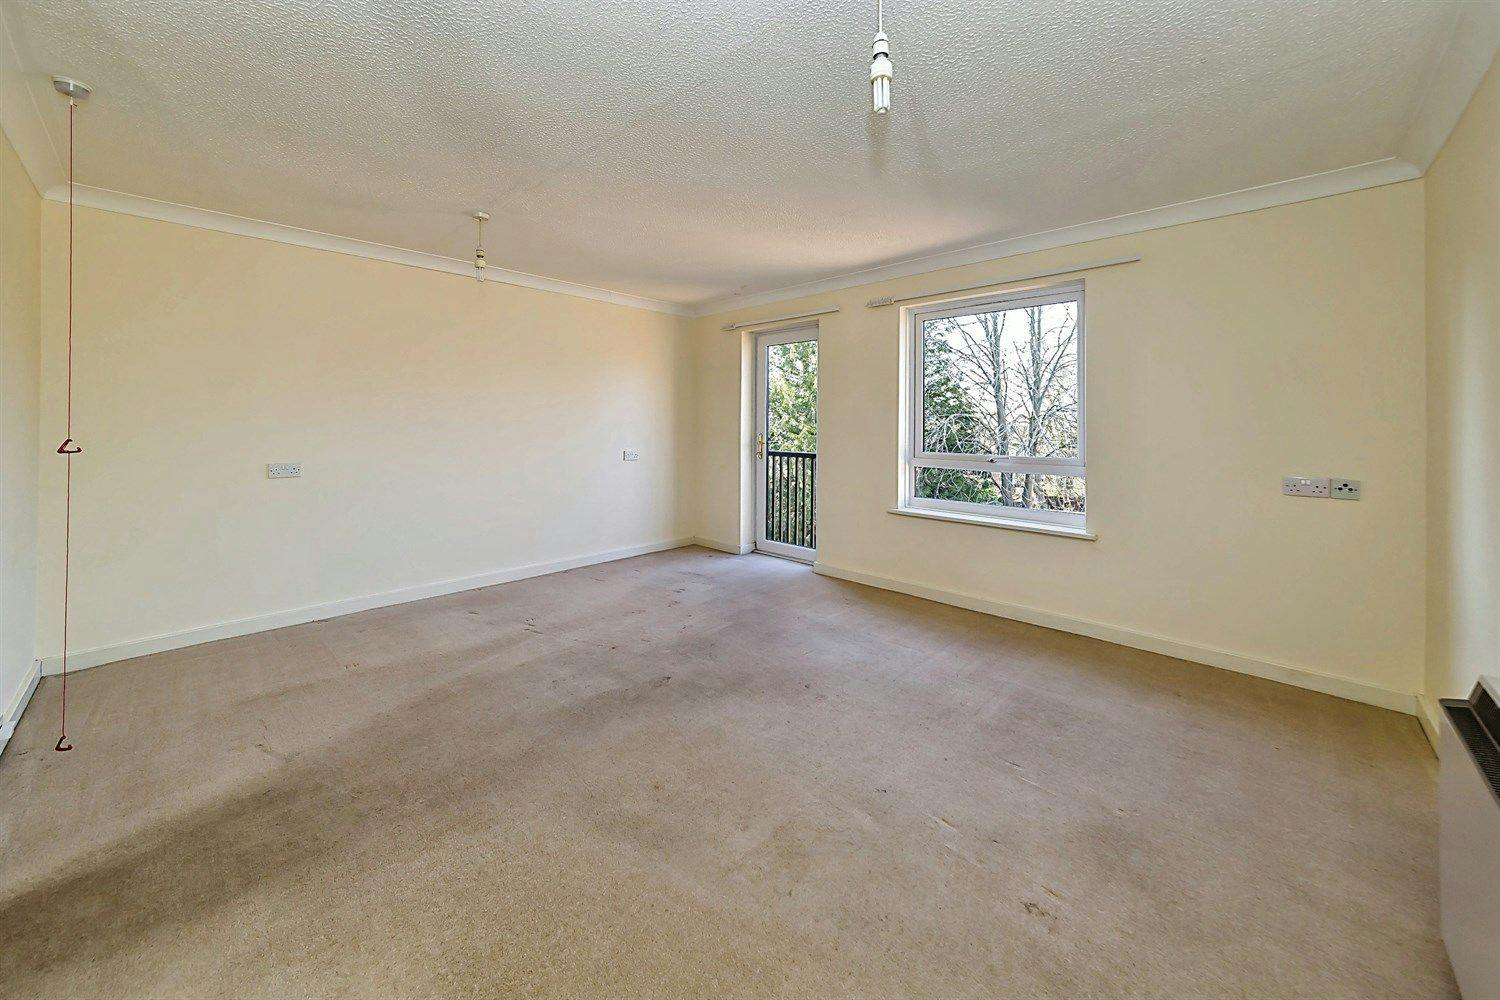 Lounge at Ashdown Gate Retirement Apartment in East Grinstead, West Sussex